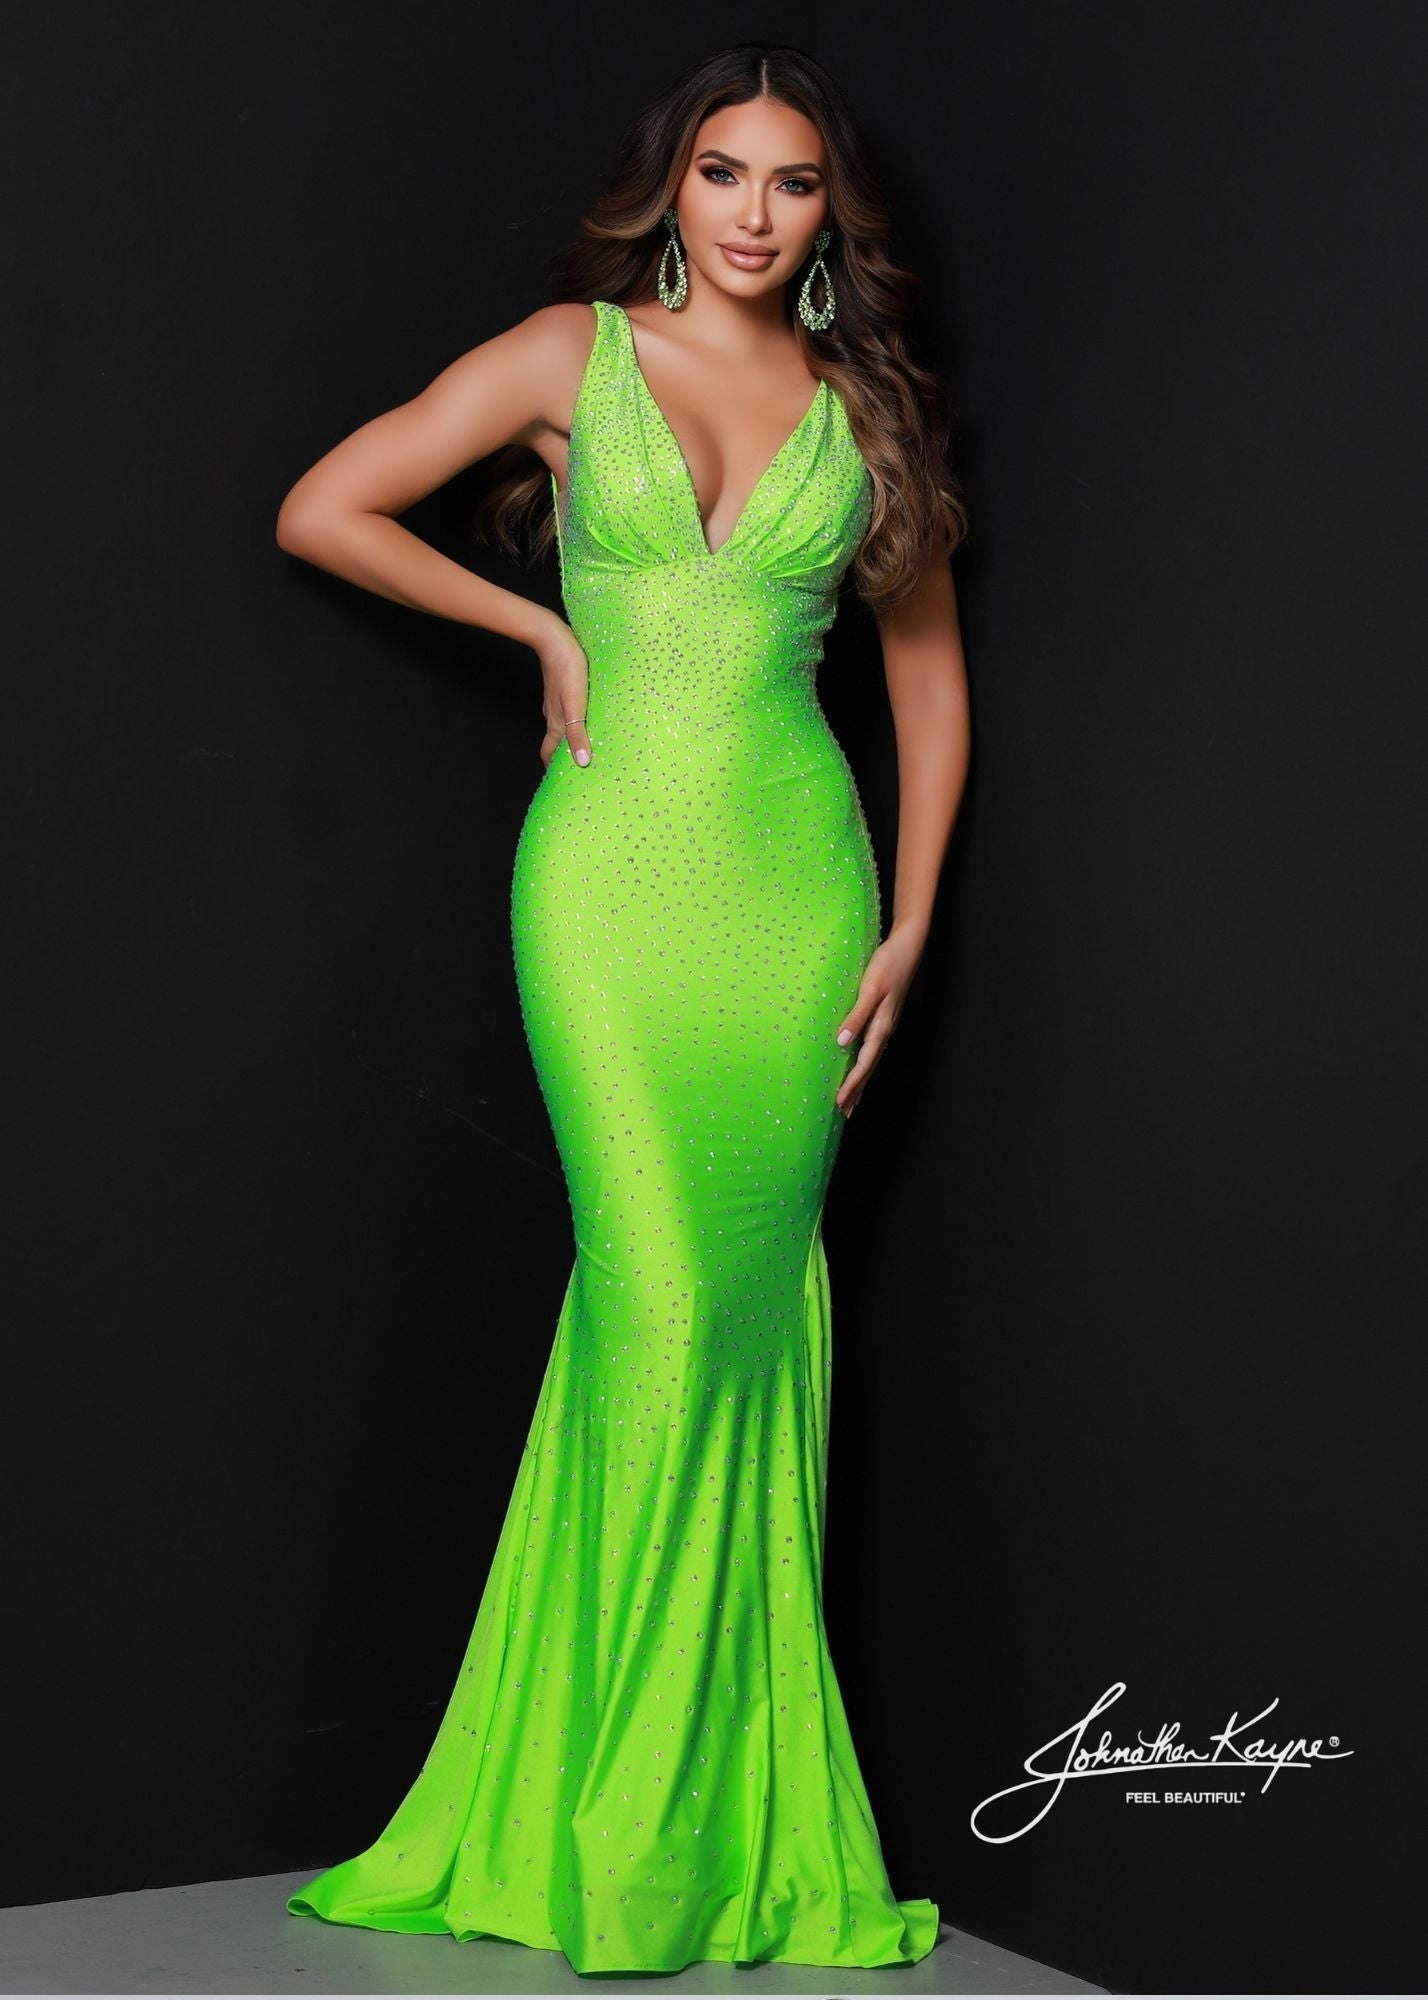 Johnathan-Kayne-Dress-9213-Lime-Green-embellished-stretch-Prom-Dress-Pageant-Gown-Formal-Evening-Wear